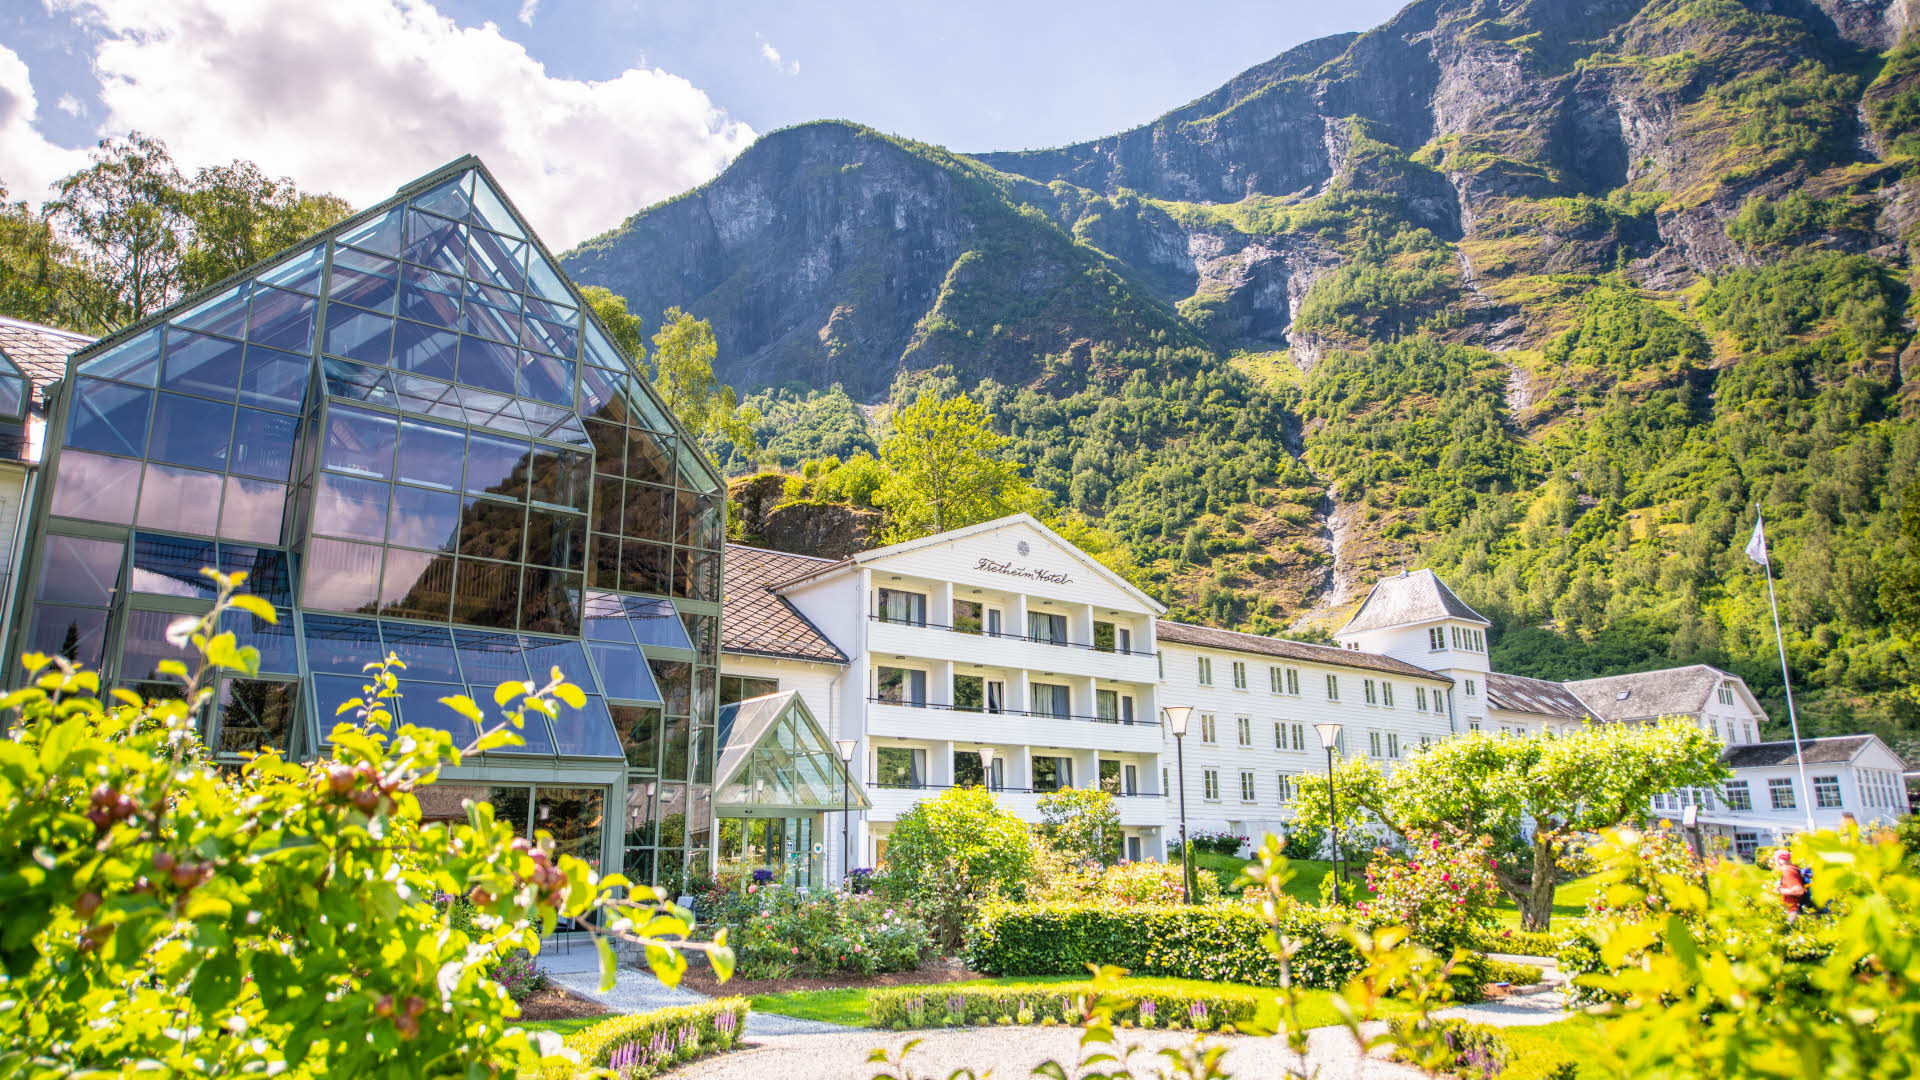 Fretheim Hotel in front of steep mountains seen from the garden in the foreground.